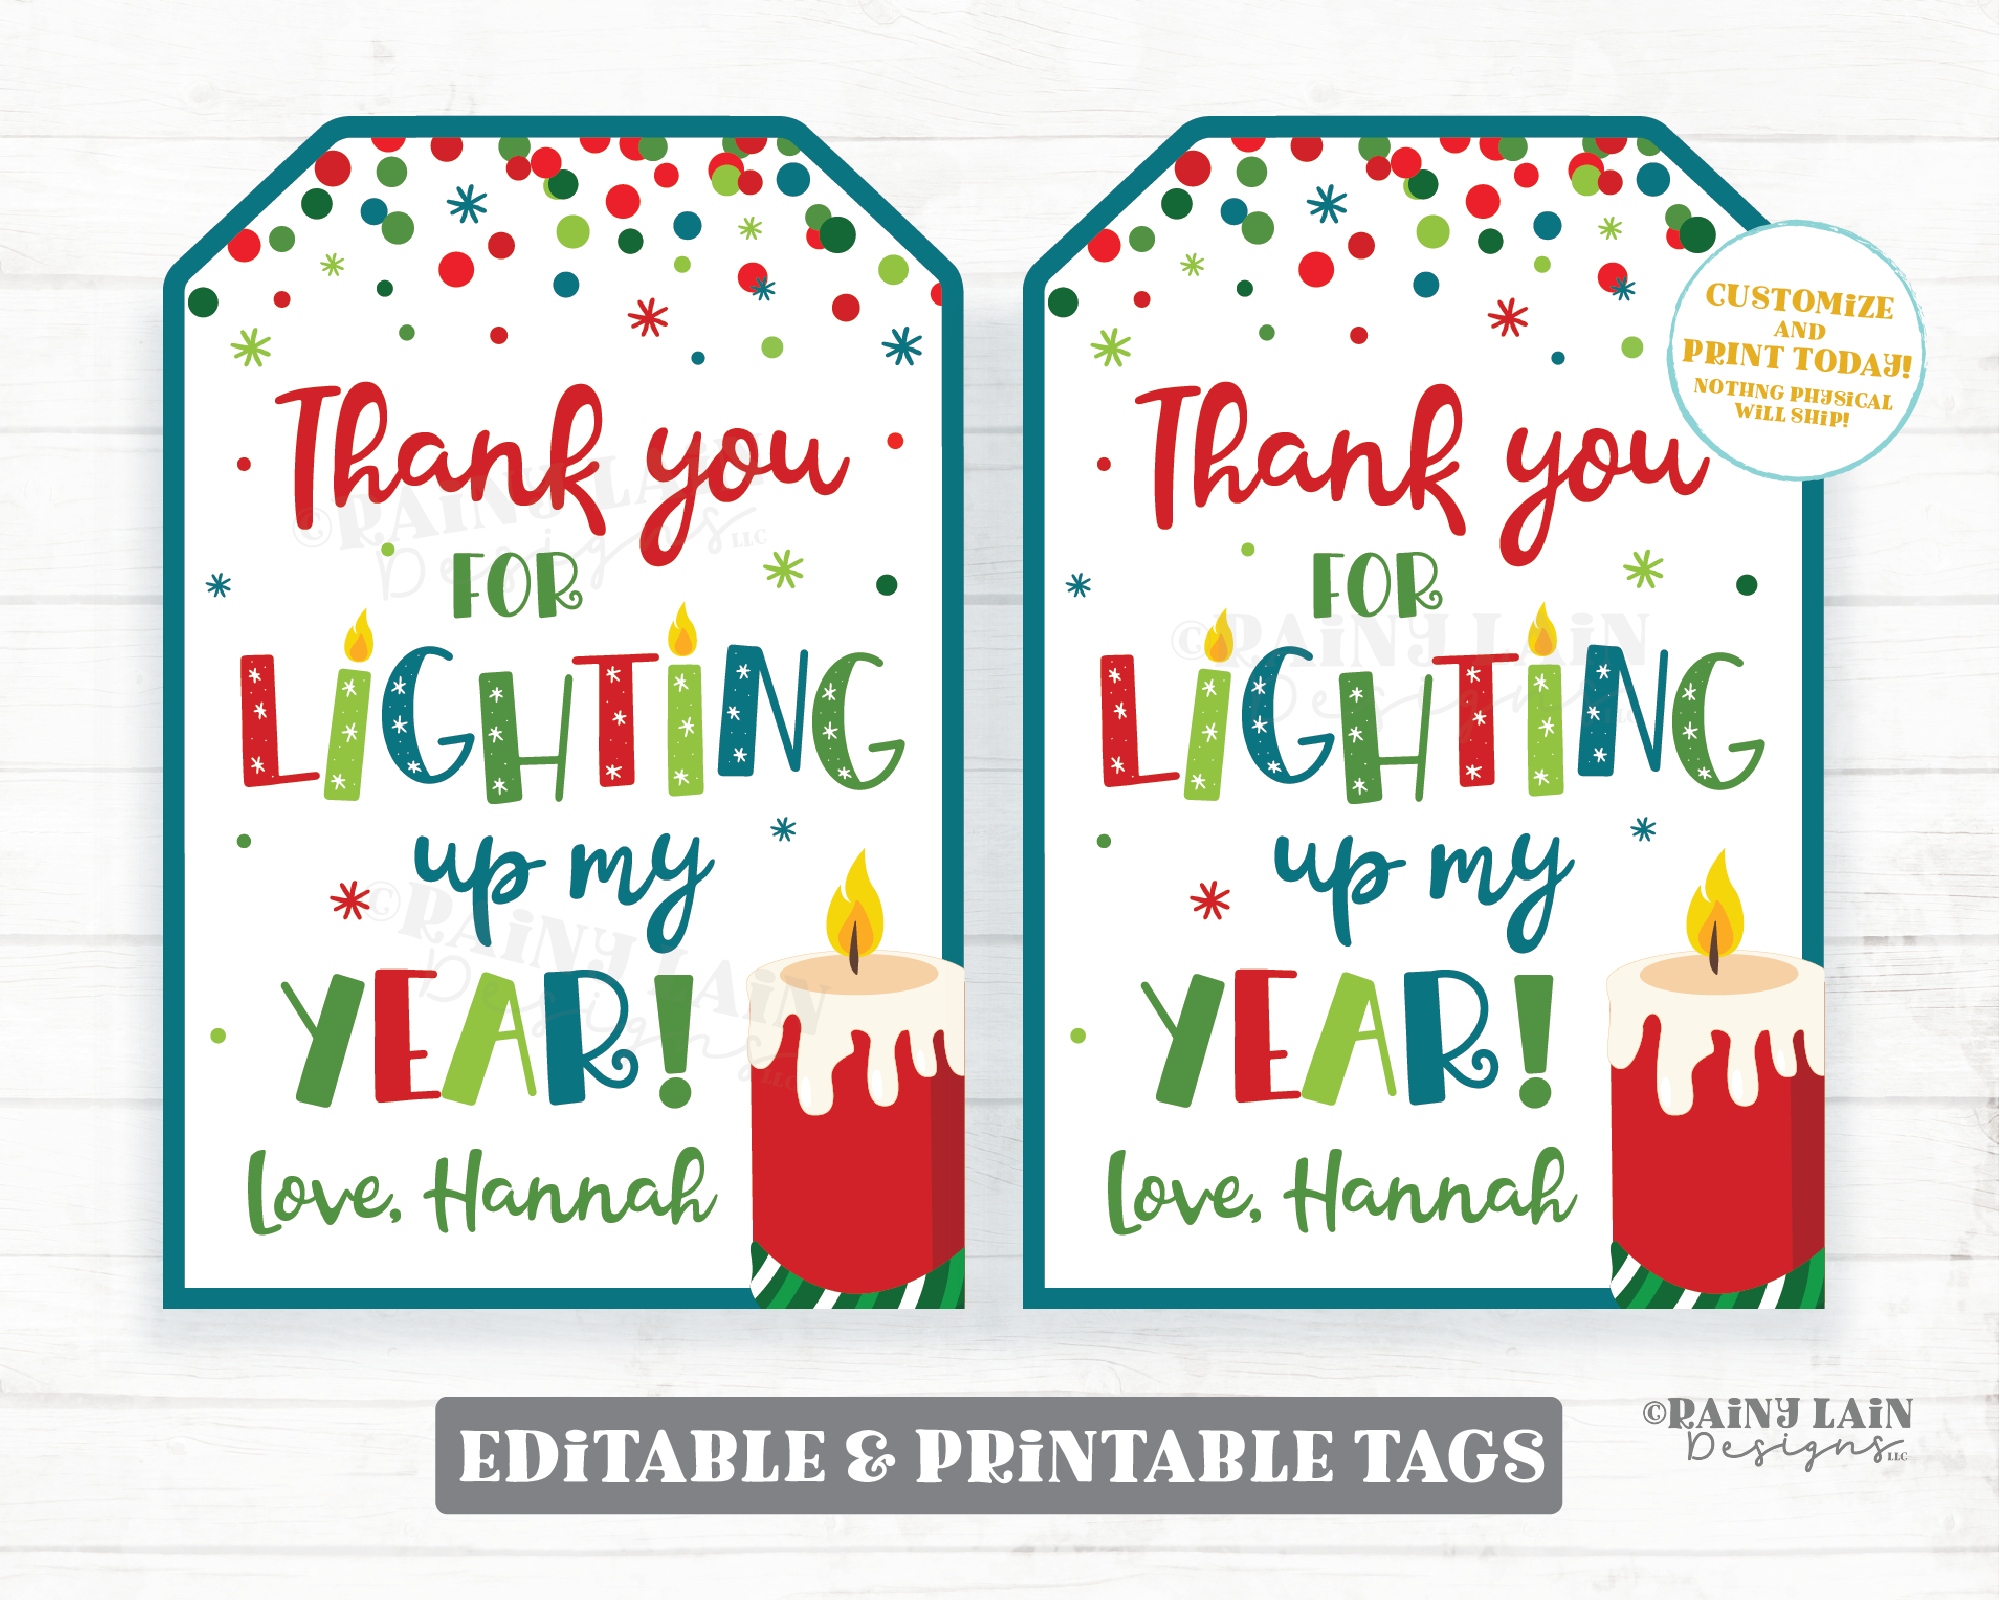 Thank you for lighting up my life Christmas Tag Holiday Gift Candle Employee Staff Teacher PTO Thank you Appreciation Light up my Life